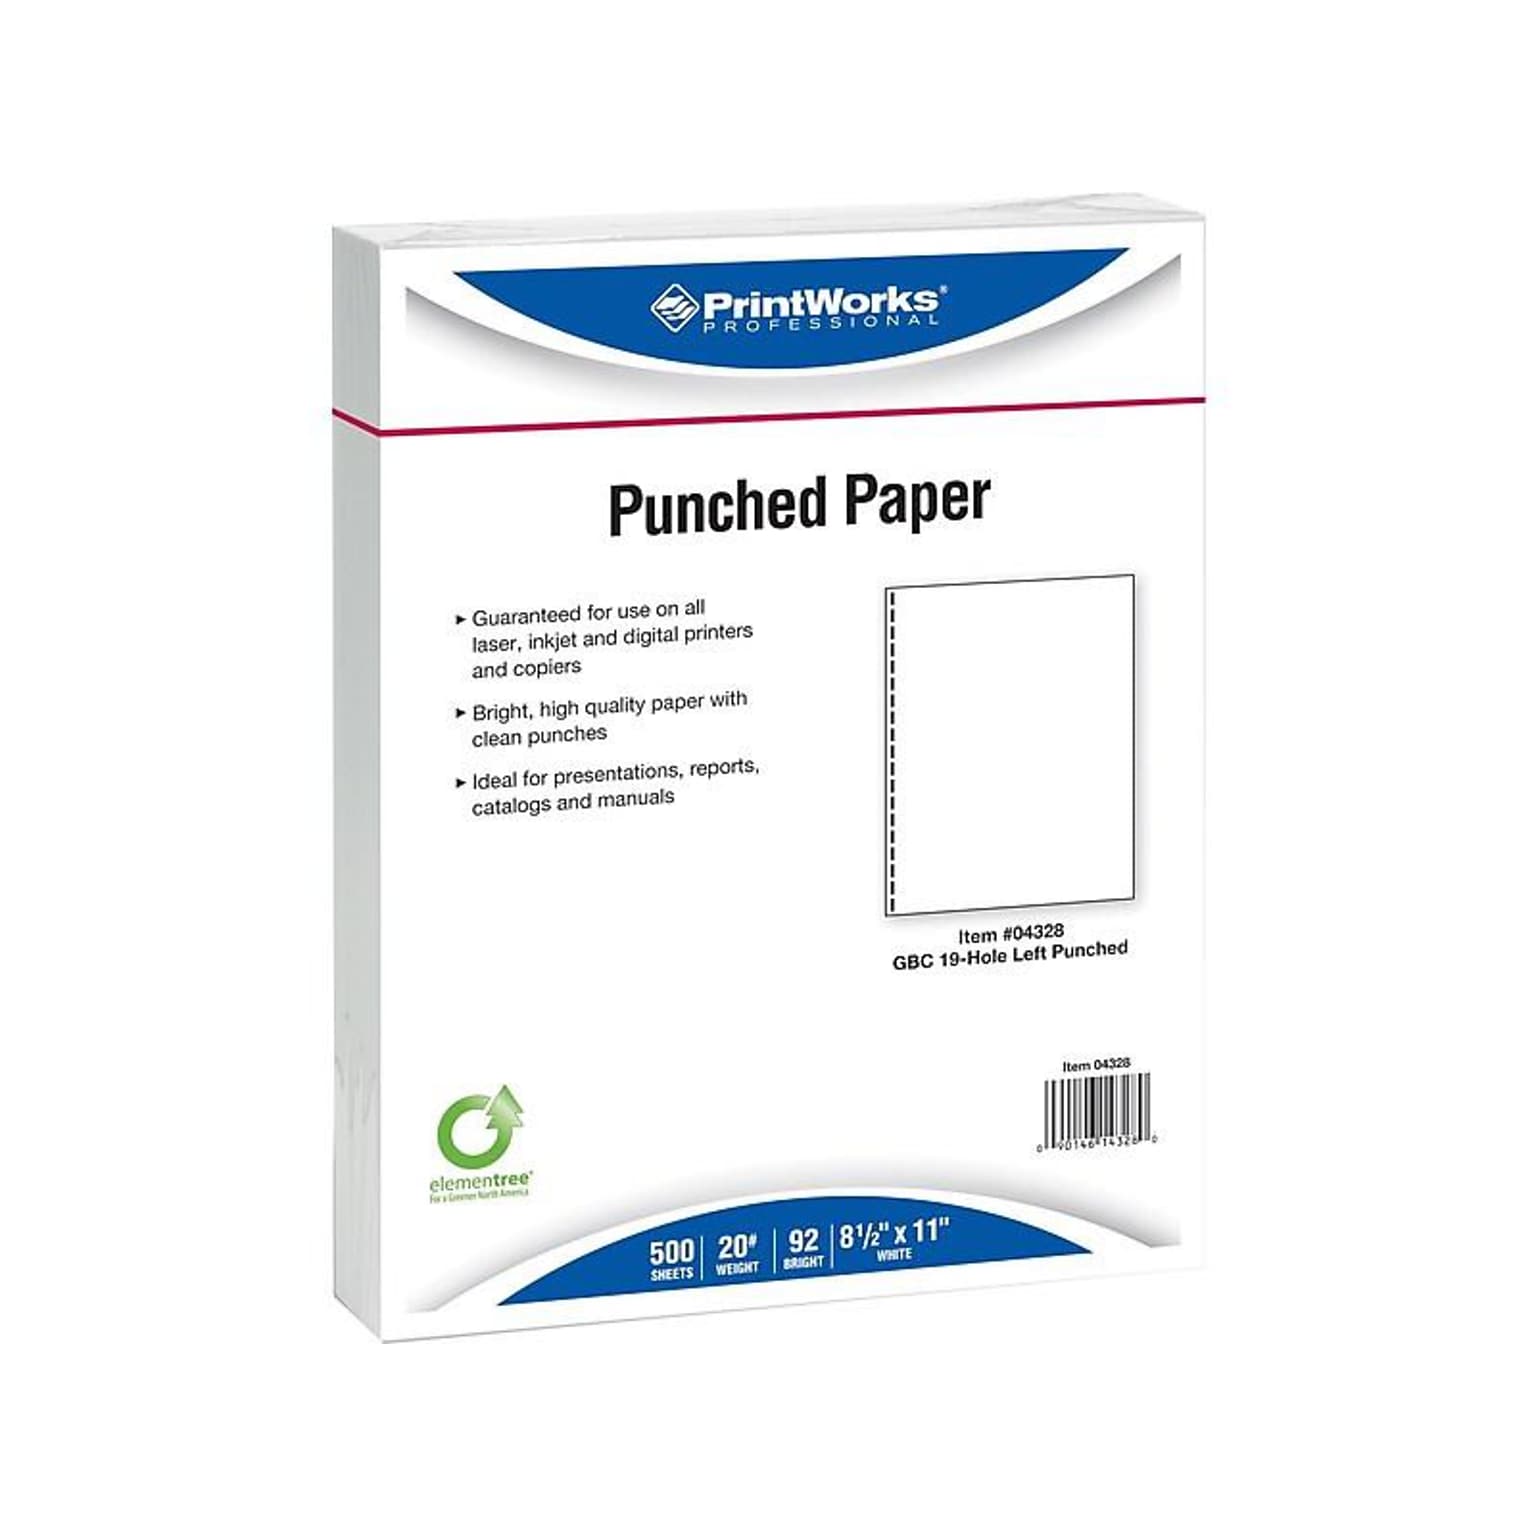 Printworks® Professional 8.5 x 11 19-Hole Punched Specialty Paper, 20 lbs., 92 Brightness, 2500 Sheets/Carton (04328)